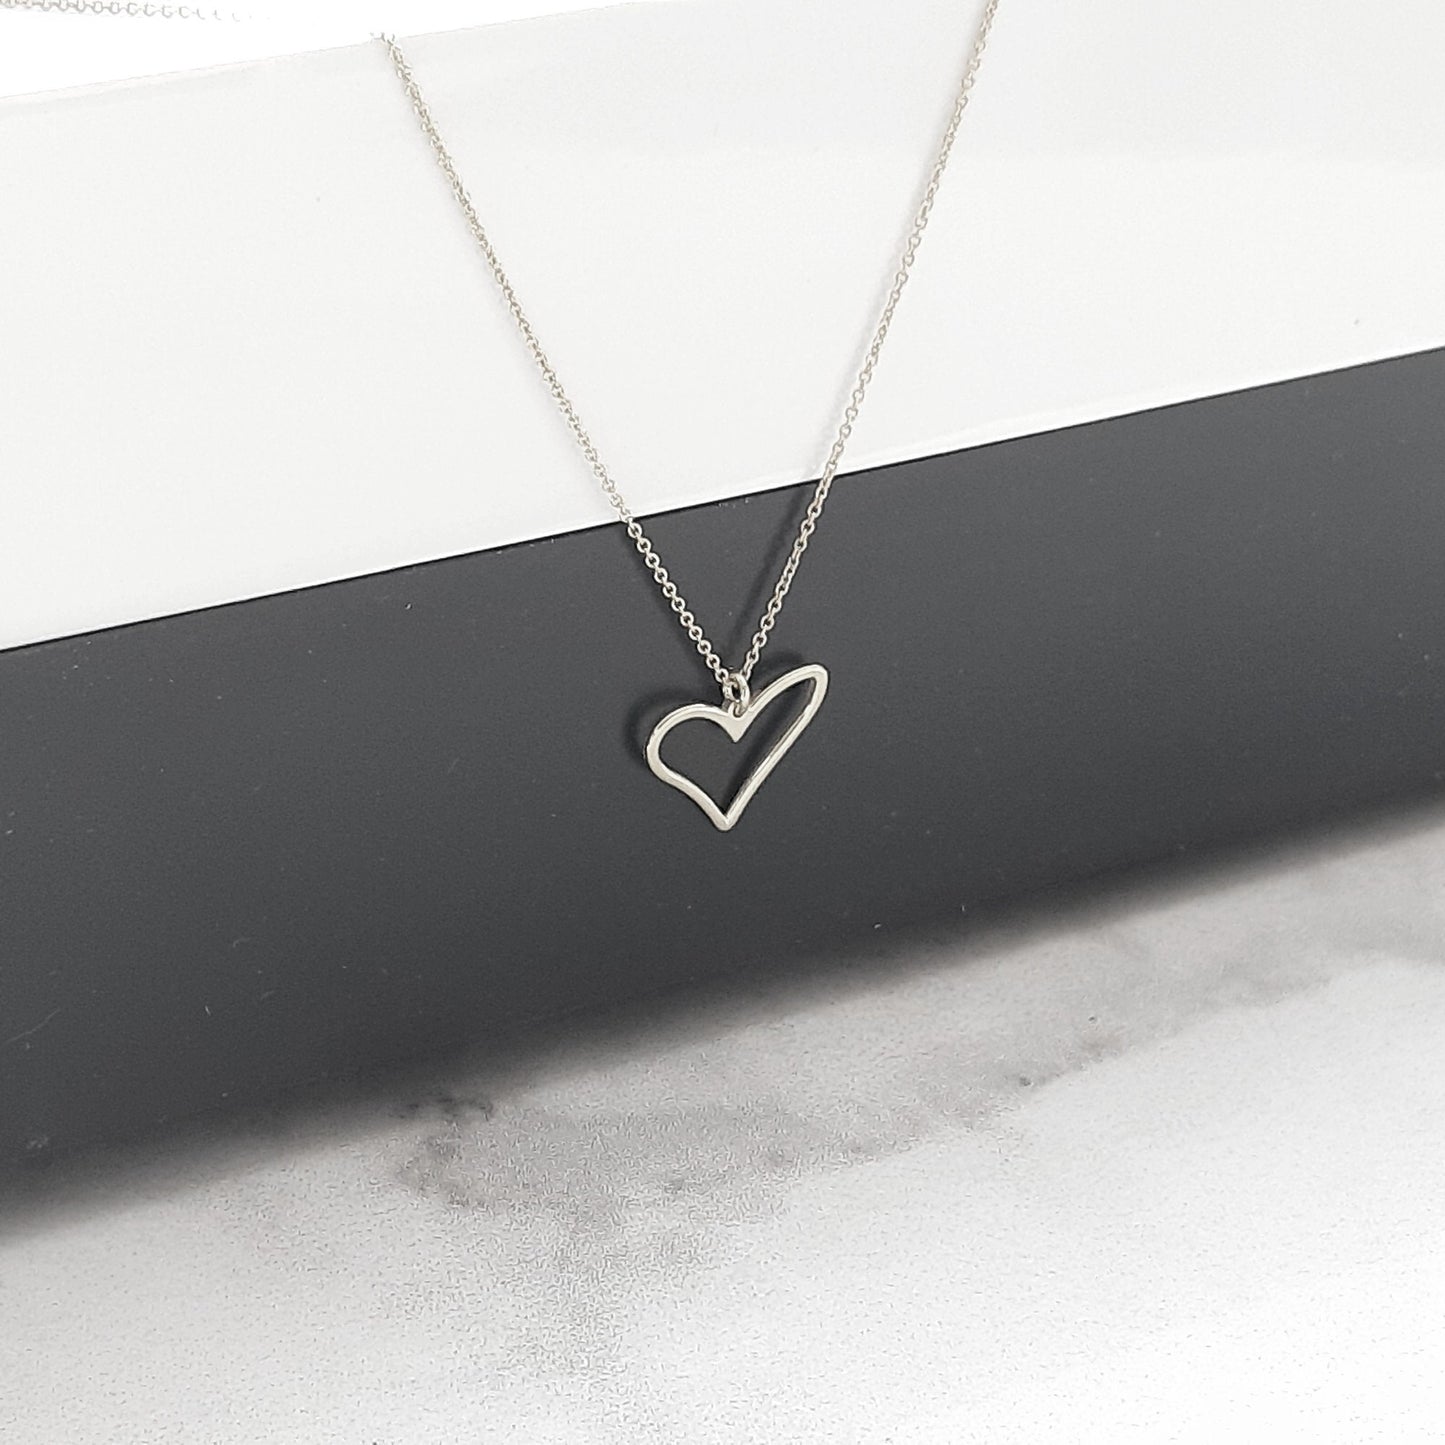 Gold Heart Necklace, Open Heart Pendant, 14K Solid Gold Layering Chain, Minimalist Jewelry, Gift for Her, necklaces for women gold Jewelry